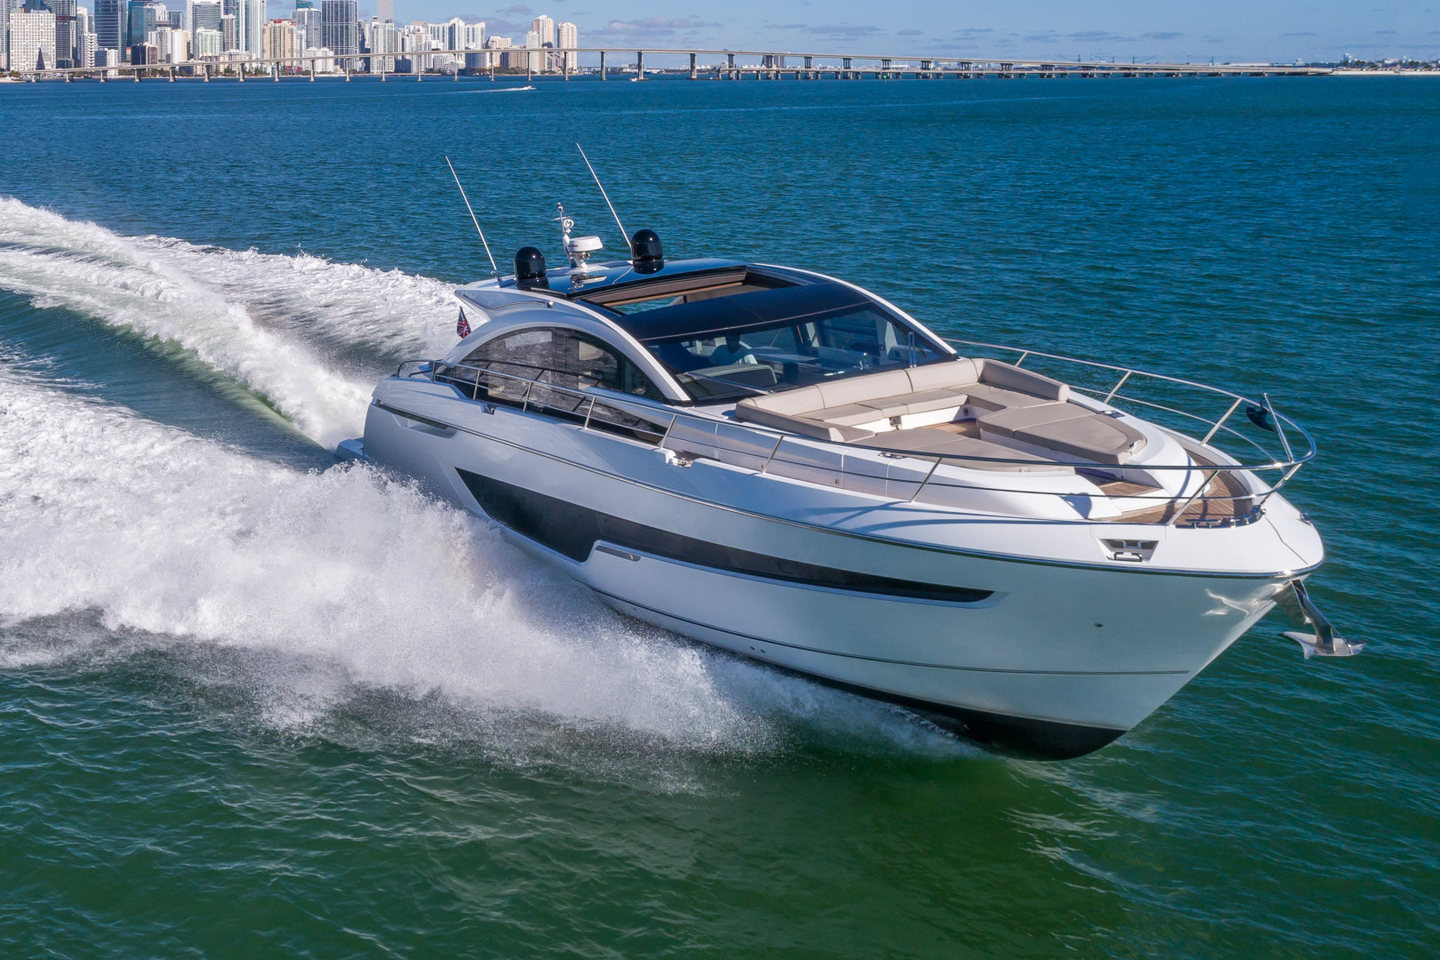 360 VR Virtual Tours of the Fairline 65 GT